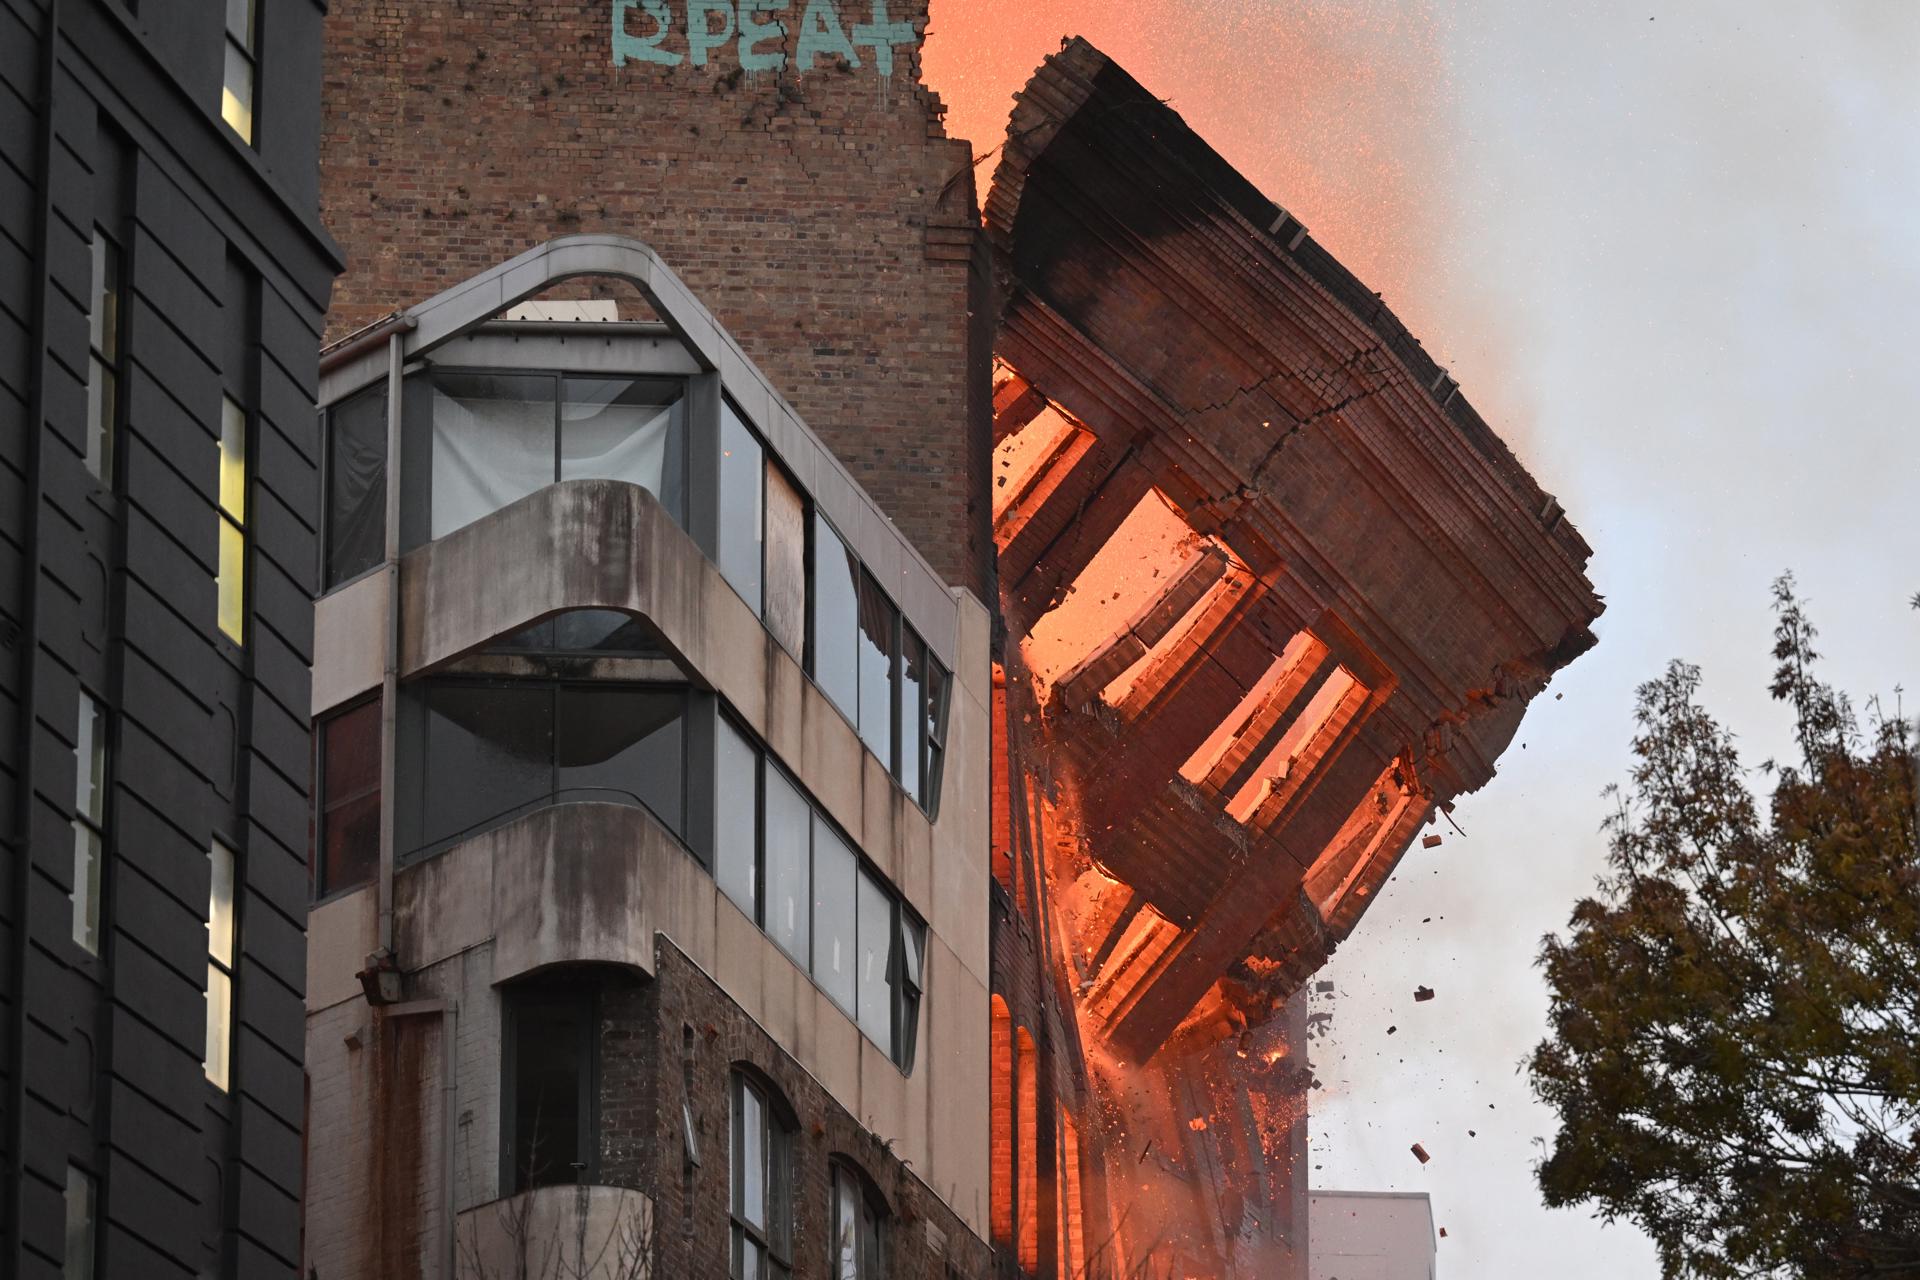 A wall collapses during a building fire in the Central Business District of Sydney, Australia, 25 May 2023. EFE/EPA/DEAN LEWINS